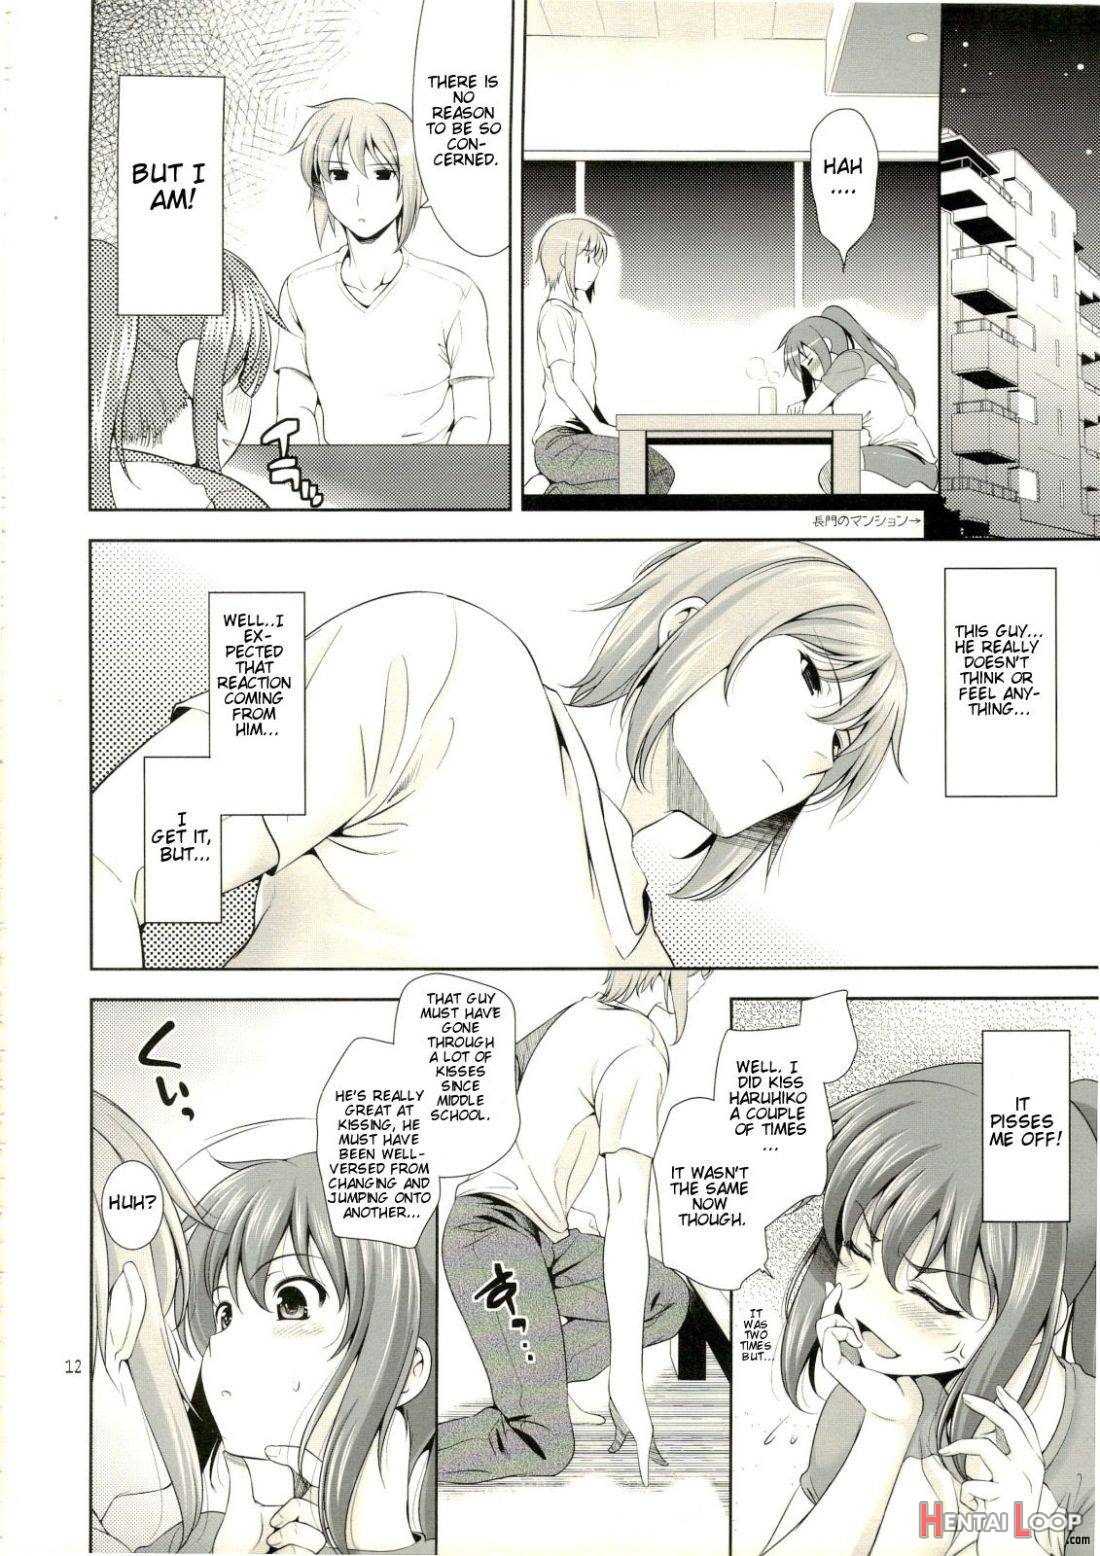 Manatsu no Yo no Yume no Mata Yume no Mata Yume page 9